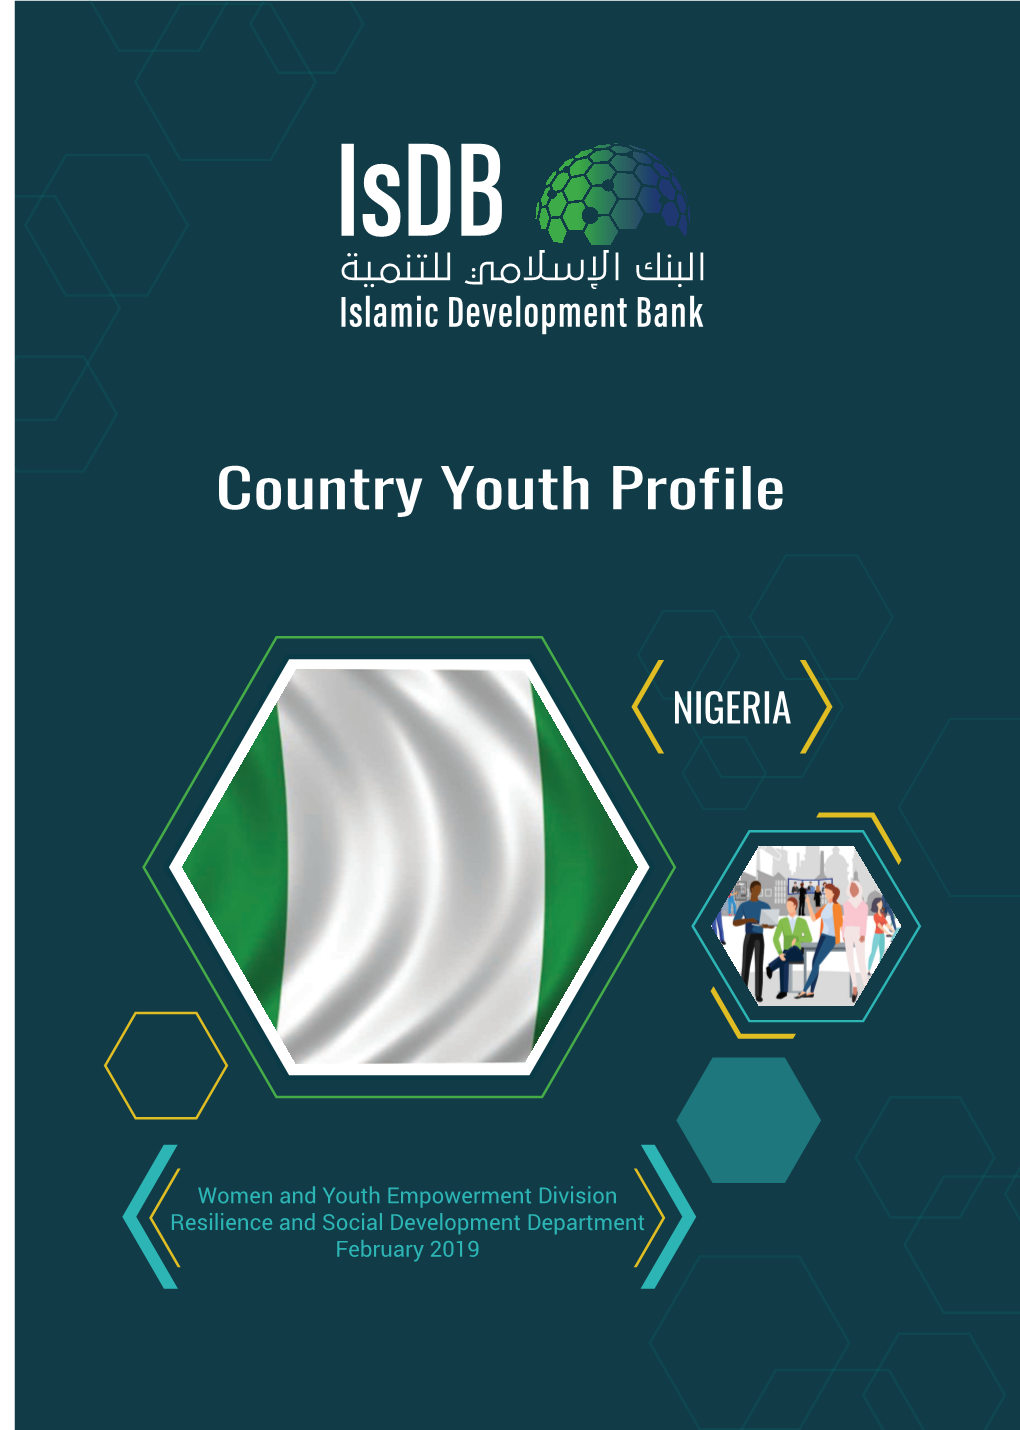 Country Youth Profile -NIGERIA